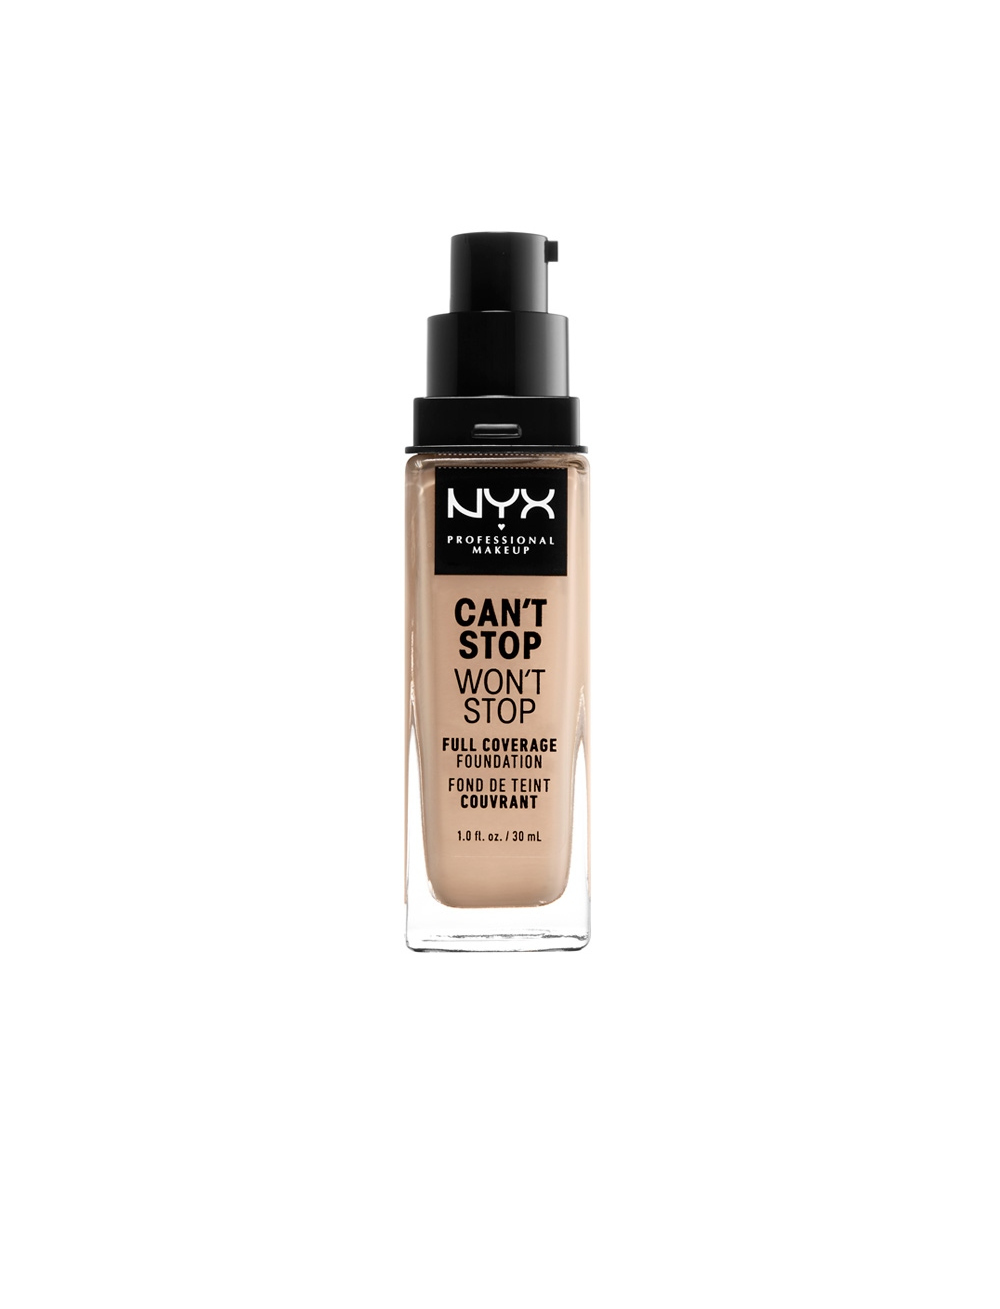 NYX professional make-up can't stop won't stop full coverage foundation #light ivory